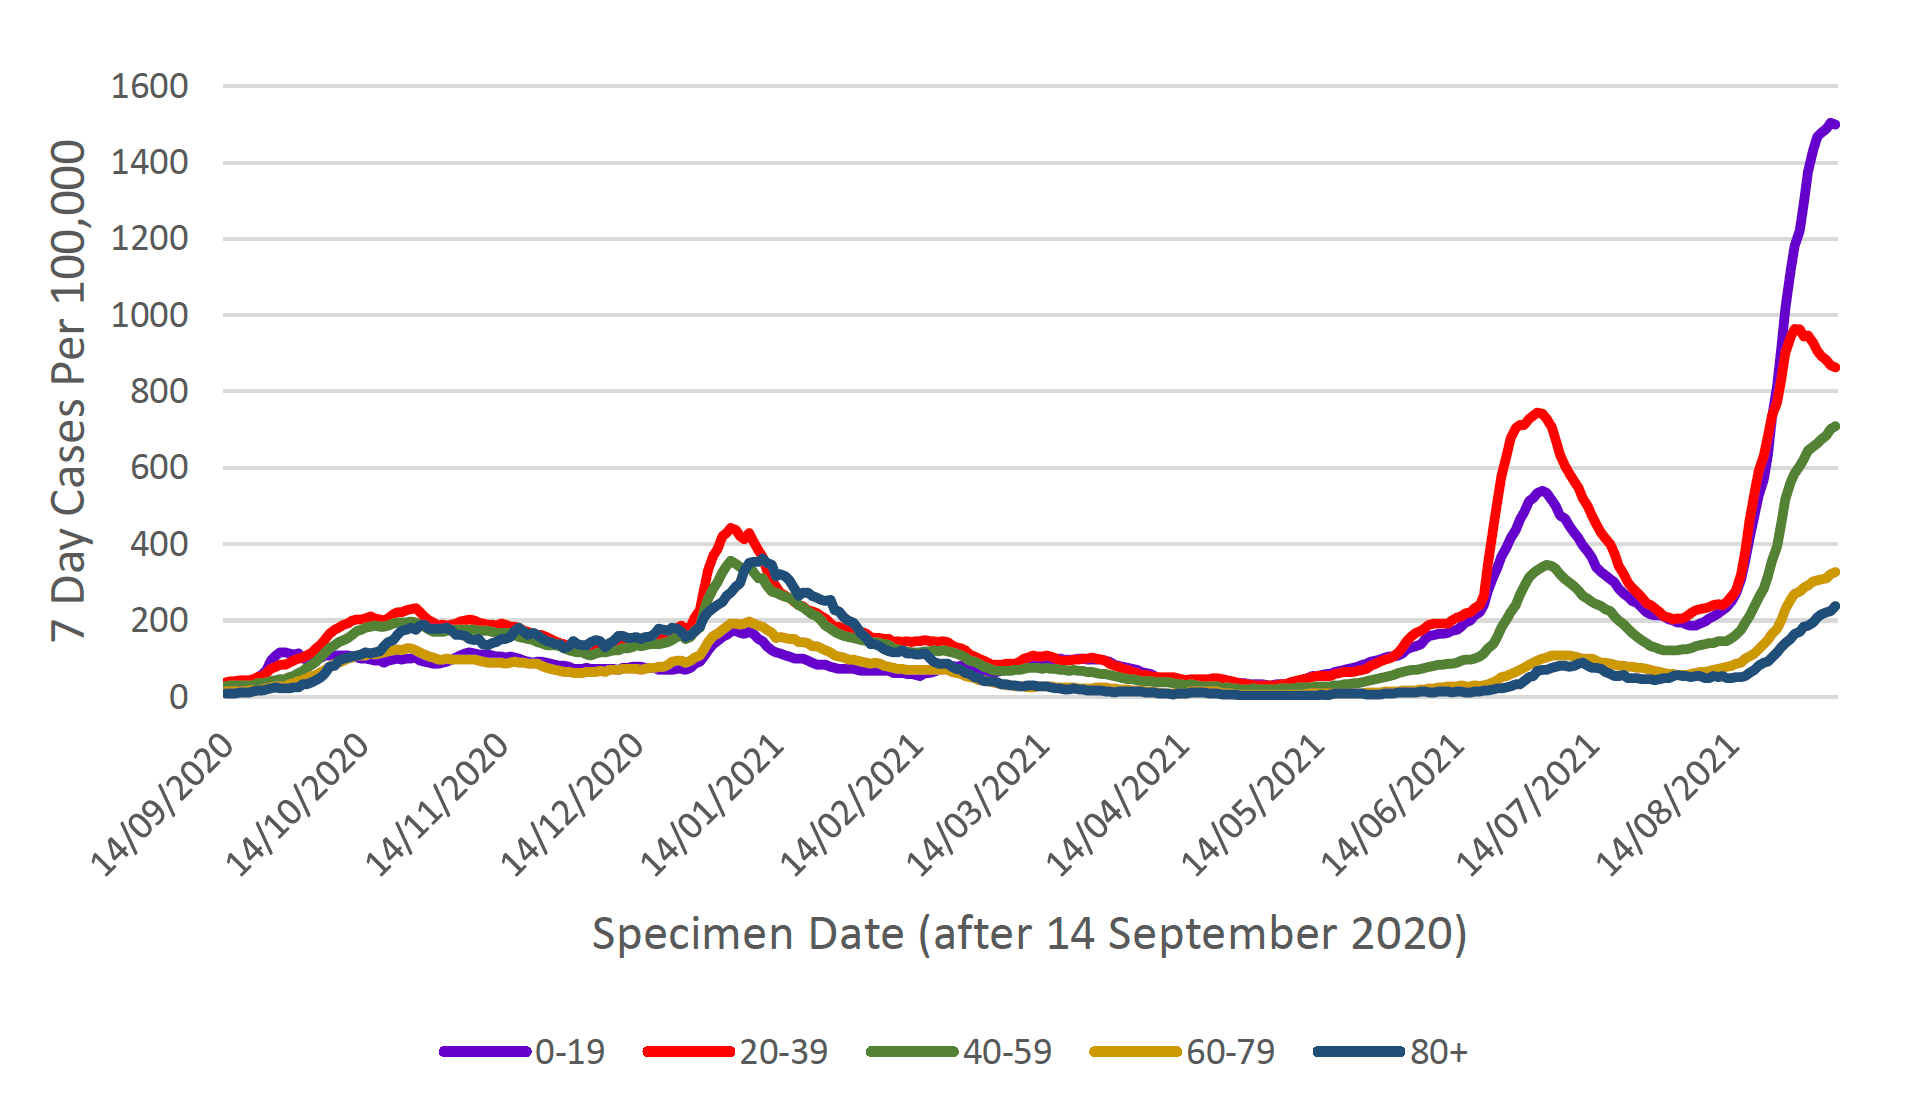 This line graph shows weekly cases per 100,000 people for five different age bands over time, from mid-September 2020. Each age band shows a similar trend with a peak in cases in January, with the 20 to 39 age band having the highest case rate, and the under 20 age band having the lowest case rate. Case rates reduced in all age groups from this peak and then started to increase again sharply from mid-May, reaching a peak at the beginning of July 2021. 7 day cases per 100,000 population then started to decrease sharply followed by a sharp increase in cases in mid-August 2021. In the week to the 6 September, case rates have gone up across all age bands except for 20-39 year olds, reaching the highest case rates recorded since the start of the pandemic for all ages but the over 80s. Case rates have started to decline amongst the 20-39 year olds from the 1 September 2021. 